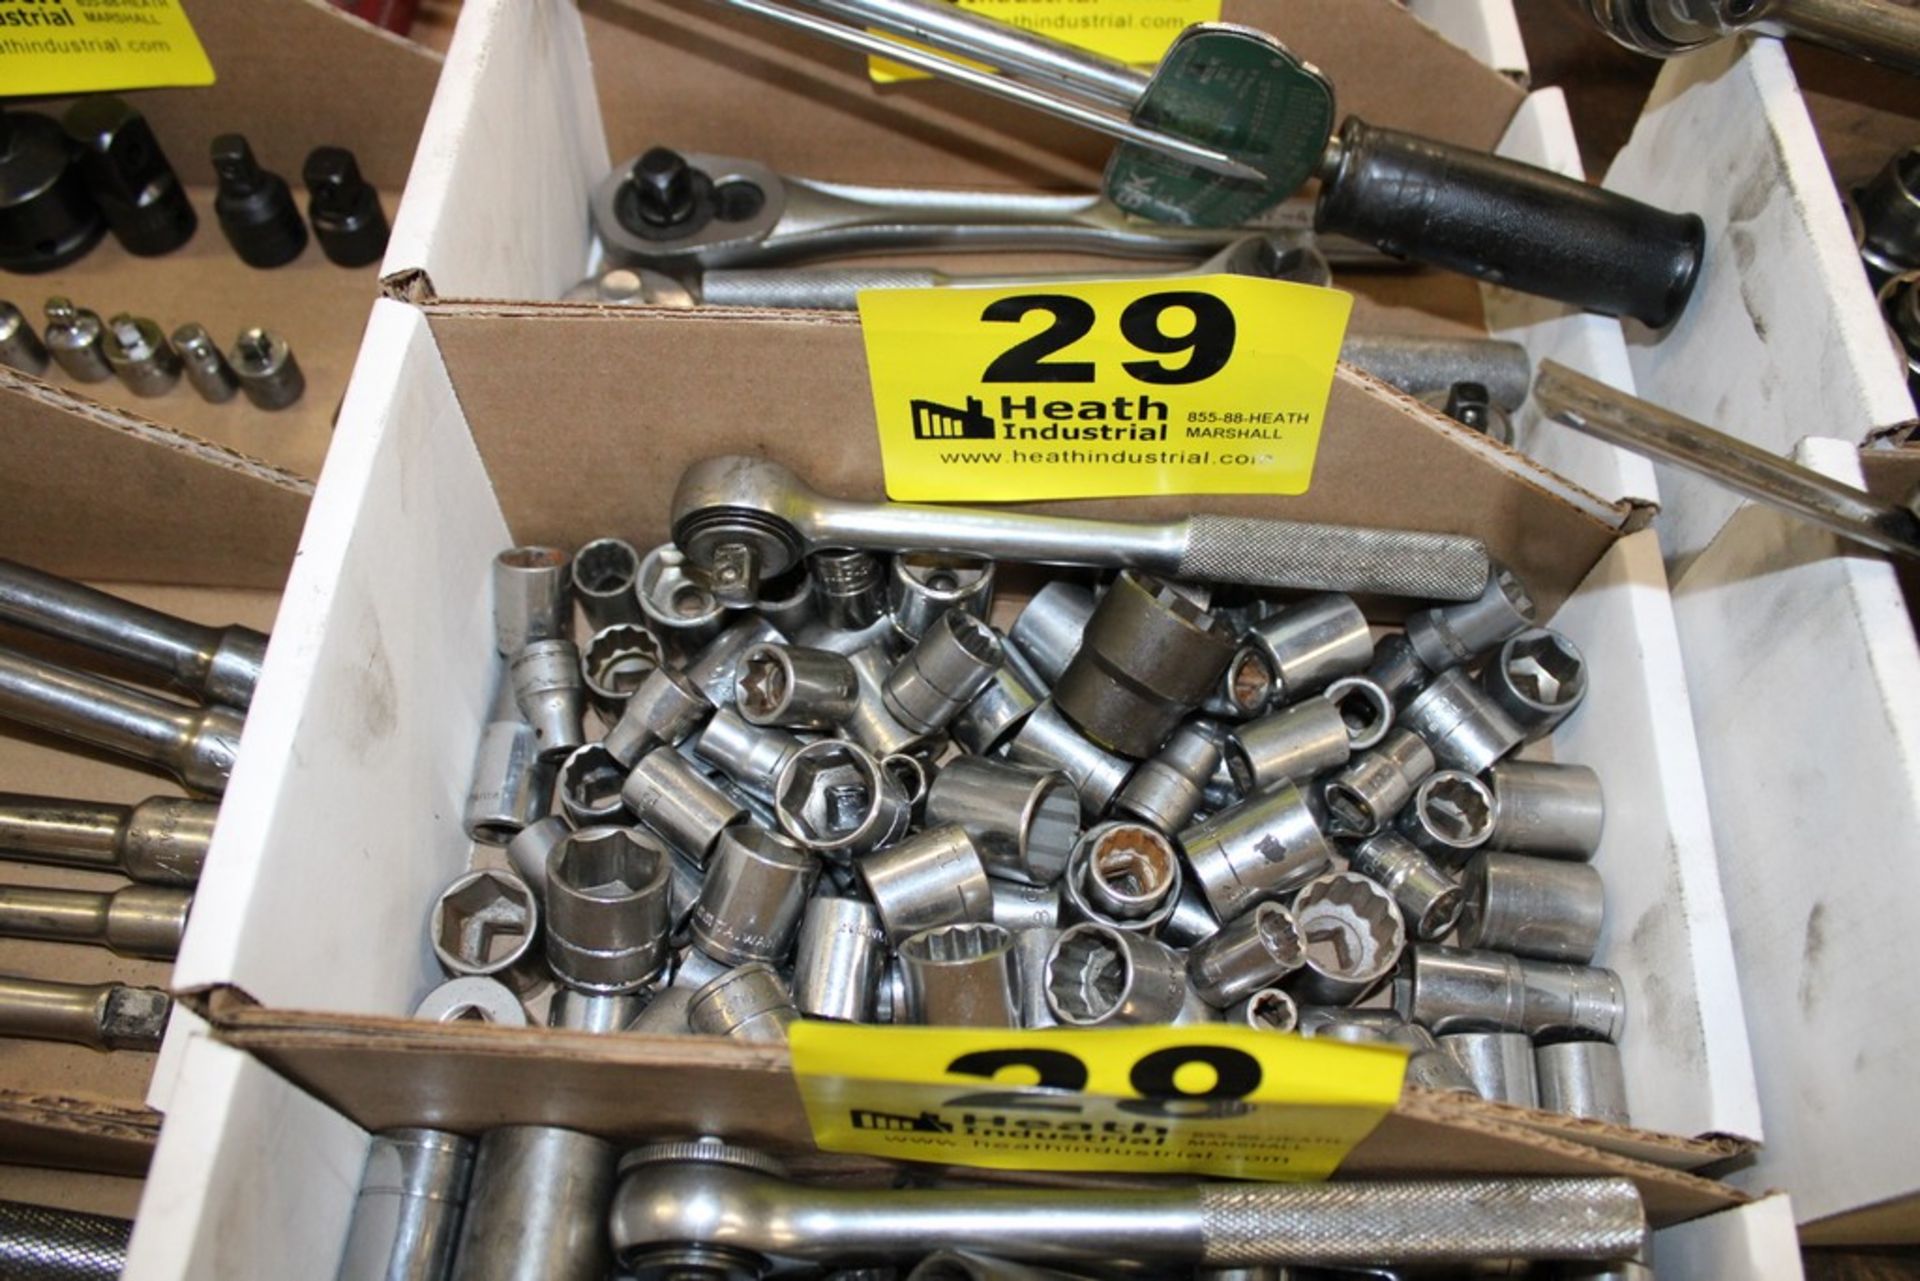 3/8" SOCKETS WITH RATCHET